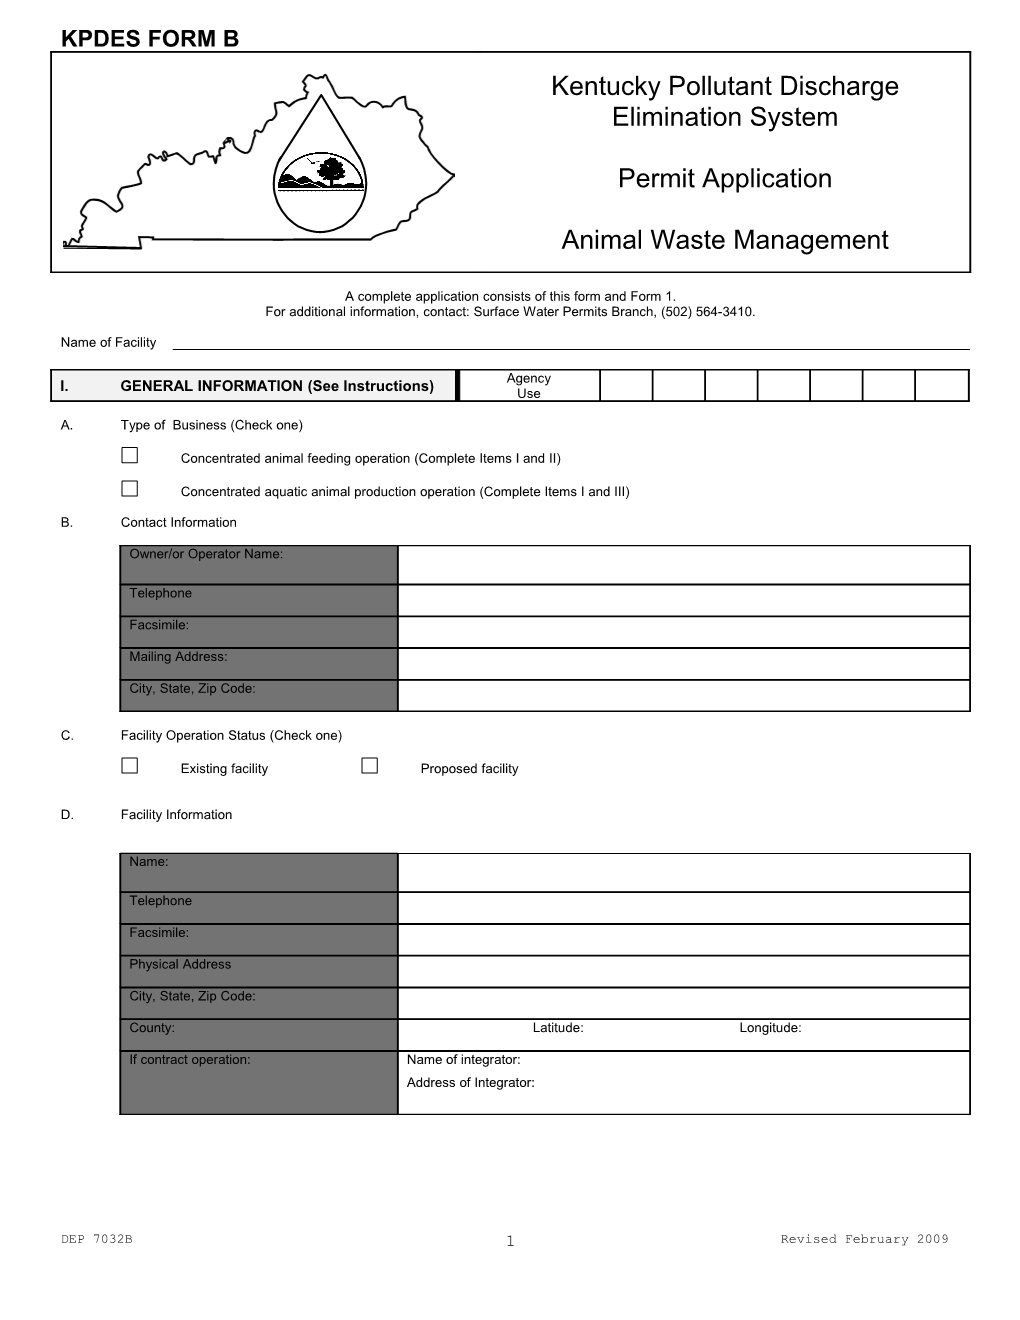 A Complete Application Consists of This Form and Form 1